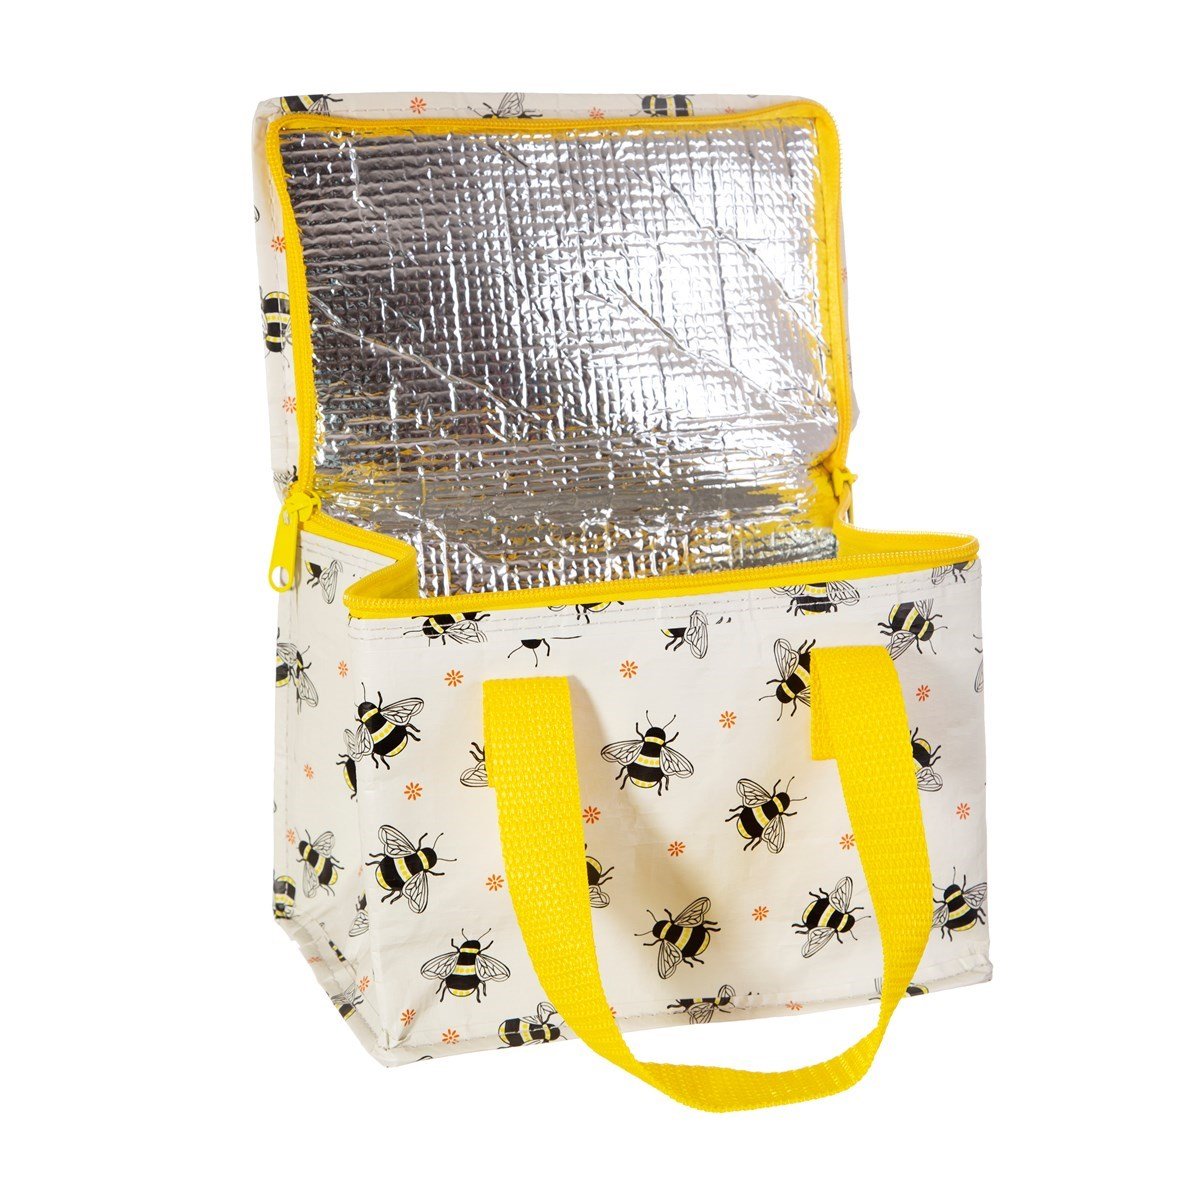 BUSY BEES LUNCH BAG LUNCH BAGS & BOXES from Eleanoras